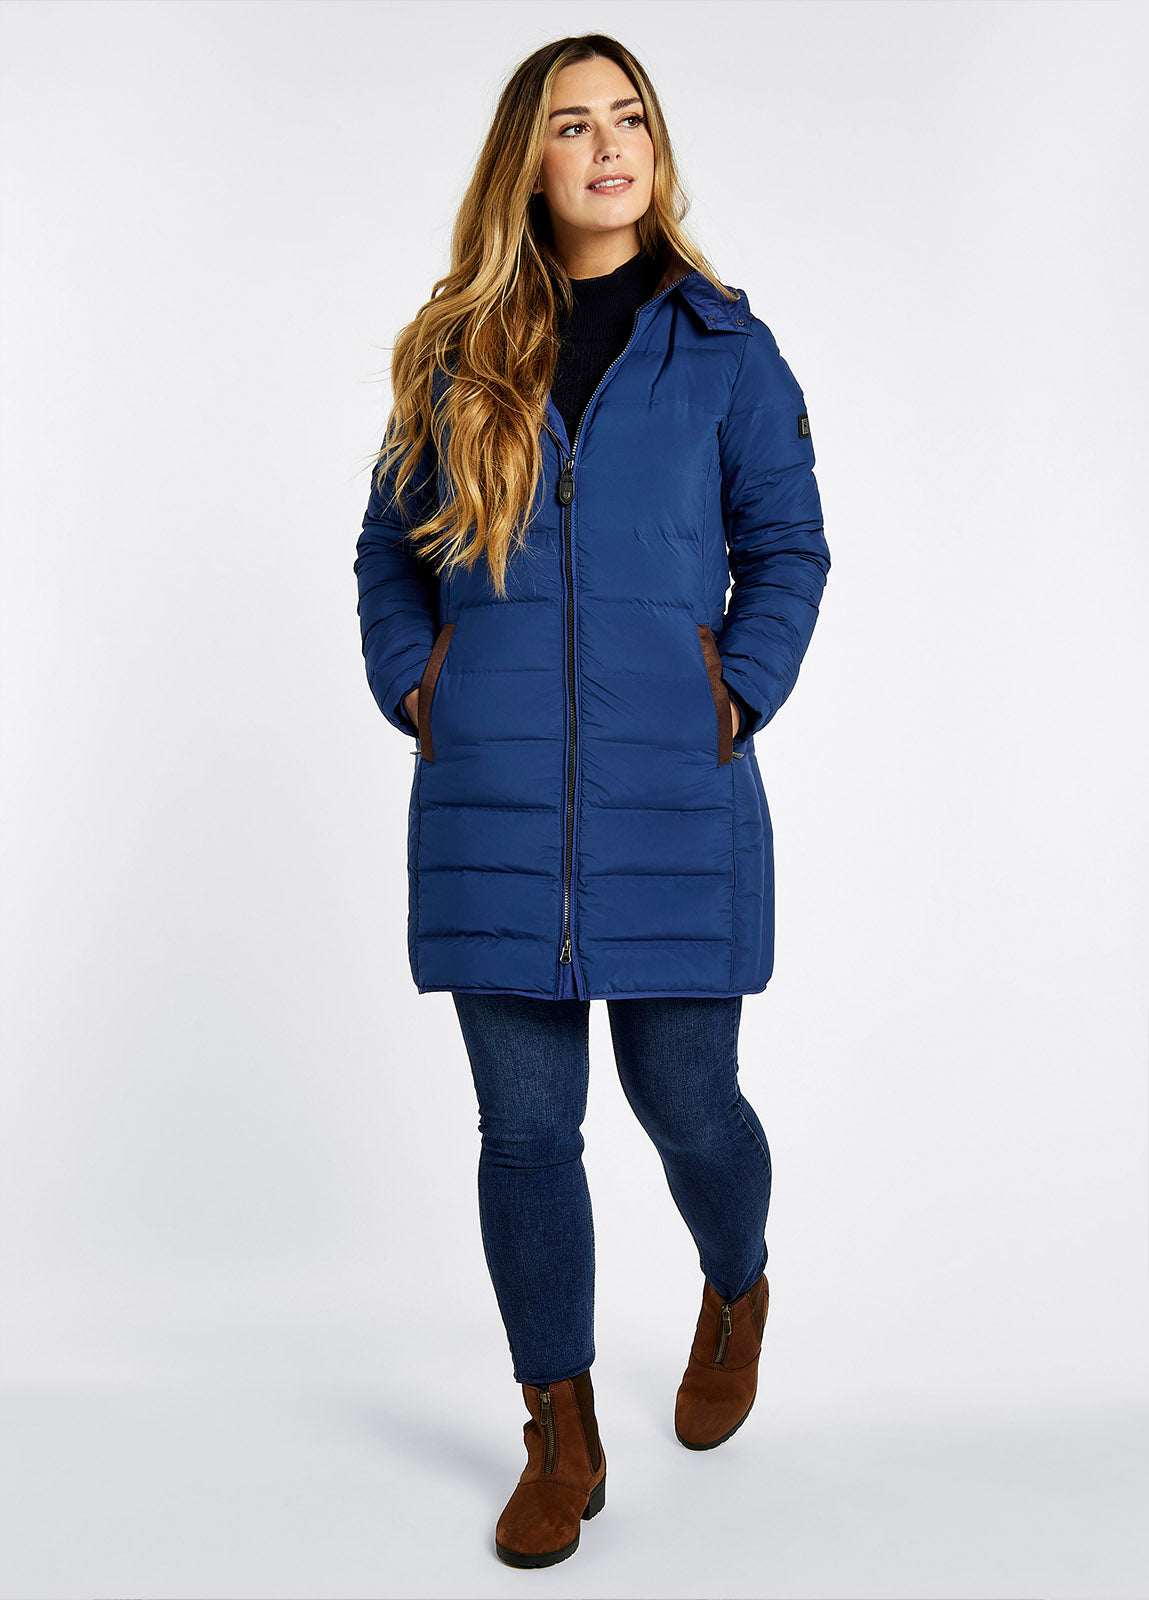 Ballybrophy Quilted Jacket - Peacock Blue